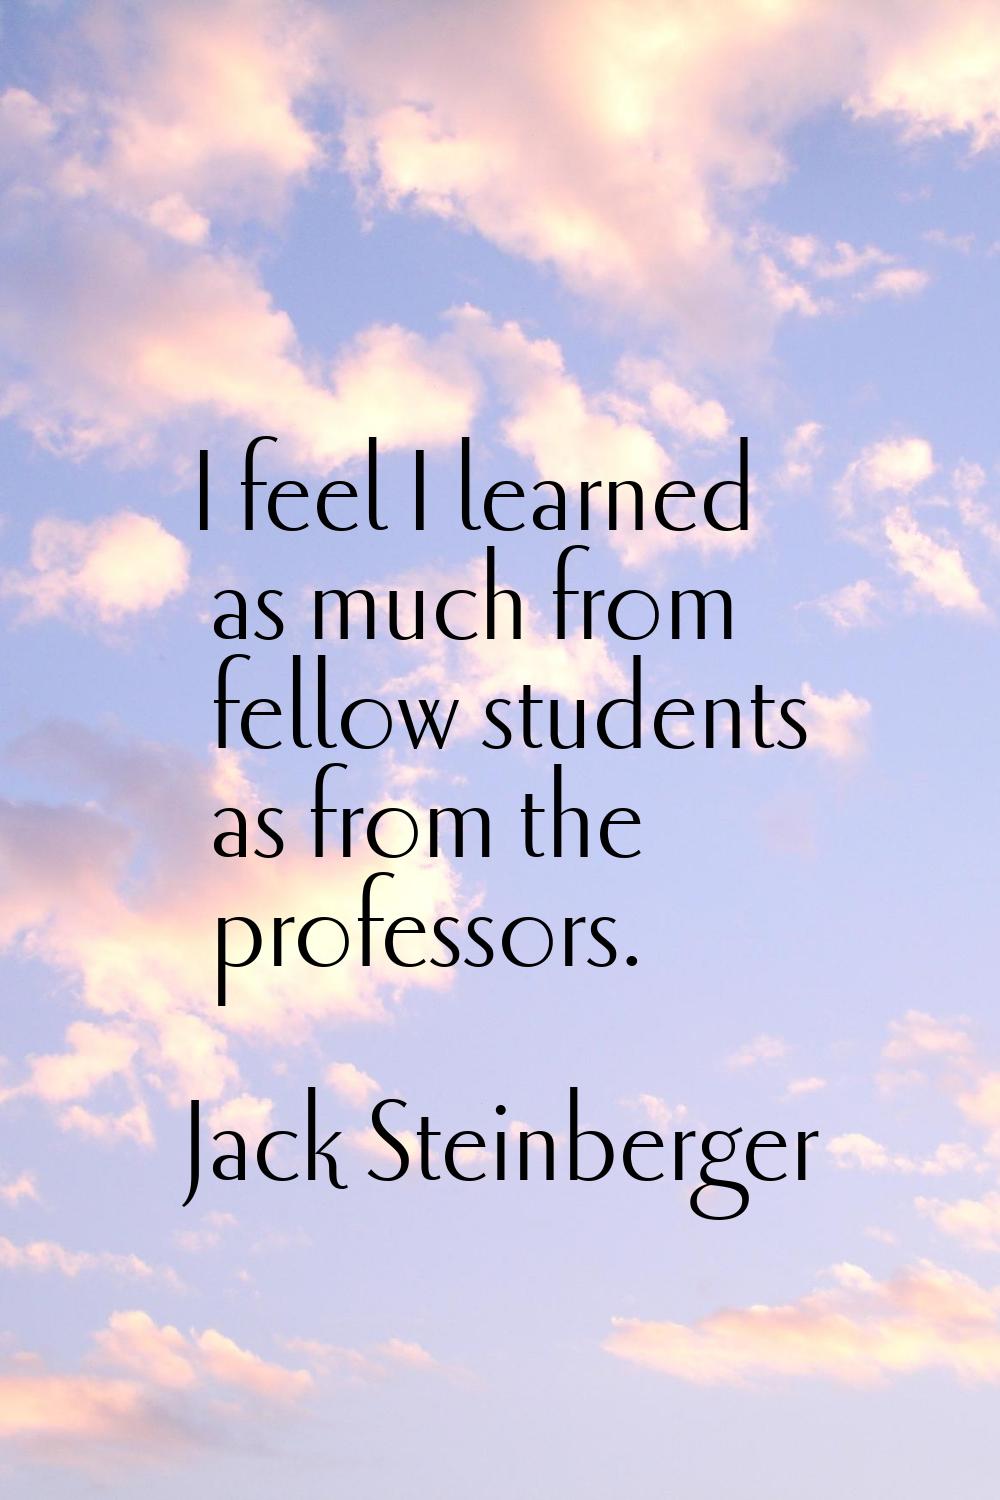 I feel I learned as much from fellow students as from the professors.